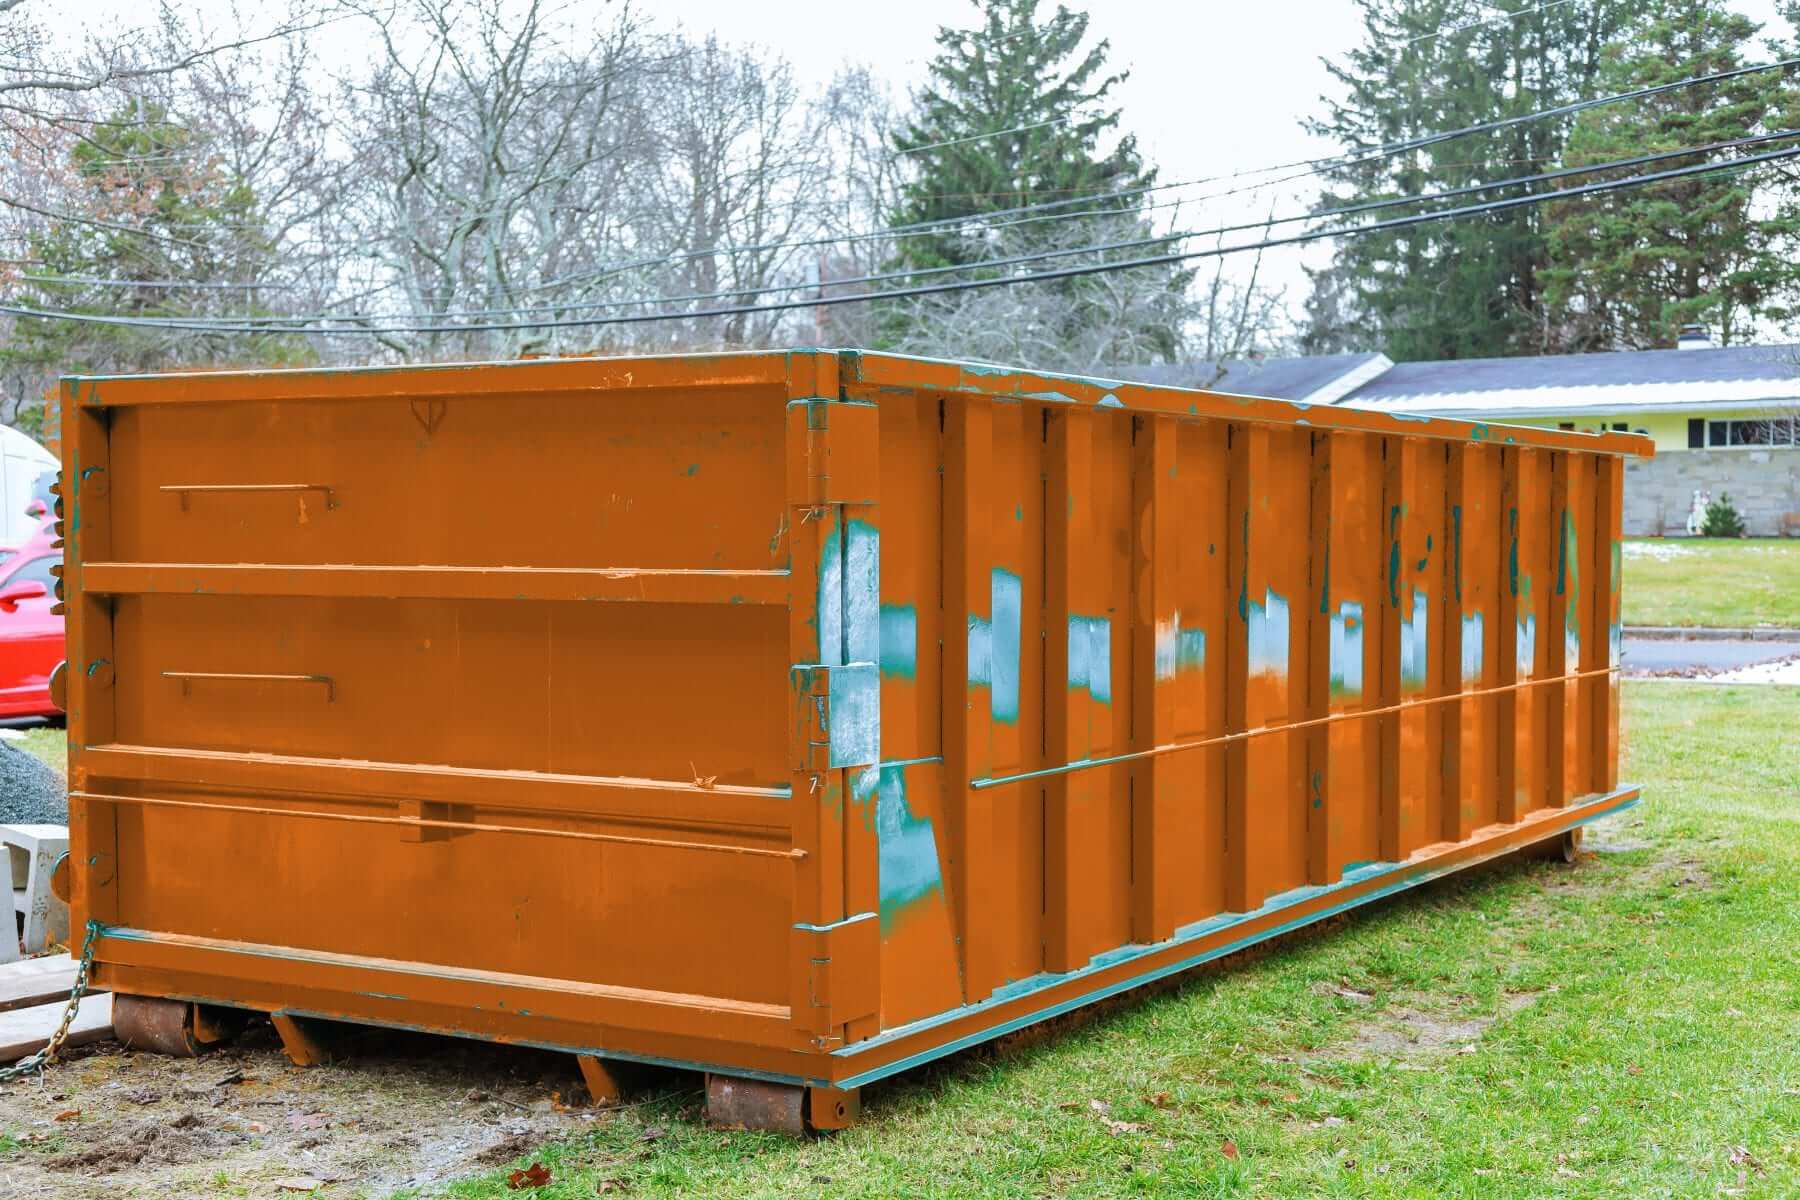 40 Cubic Yard Dumpster-Colorado Dumpster Services of Greeley